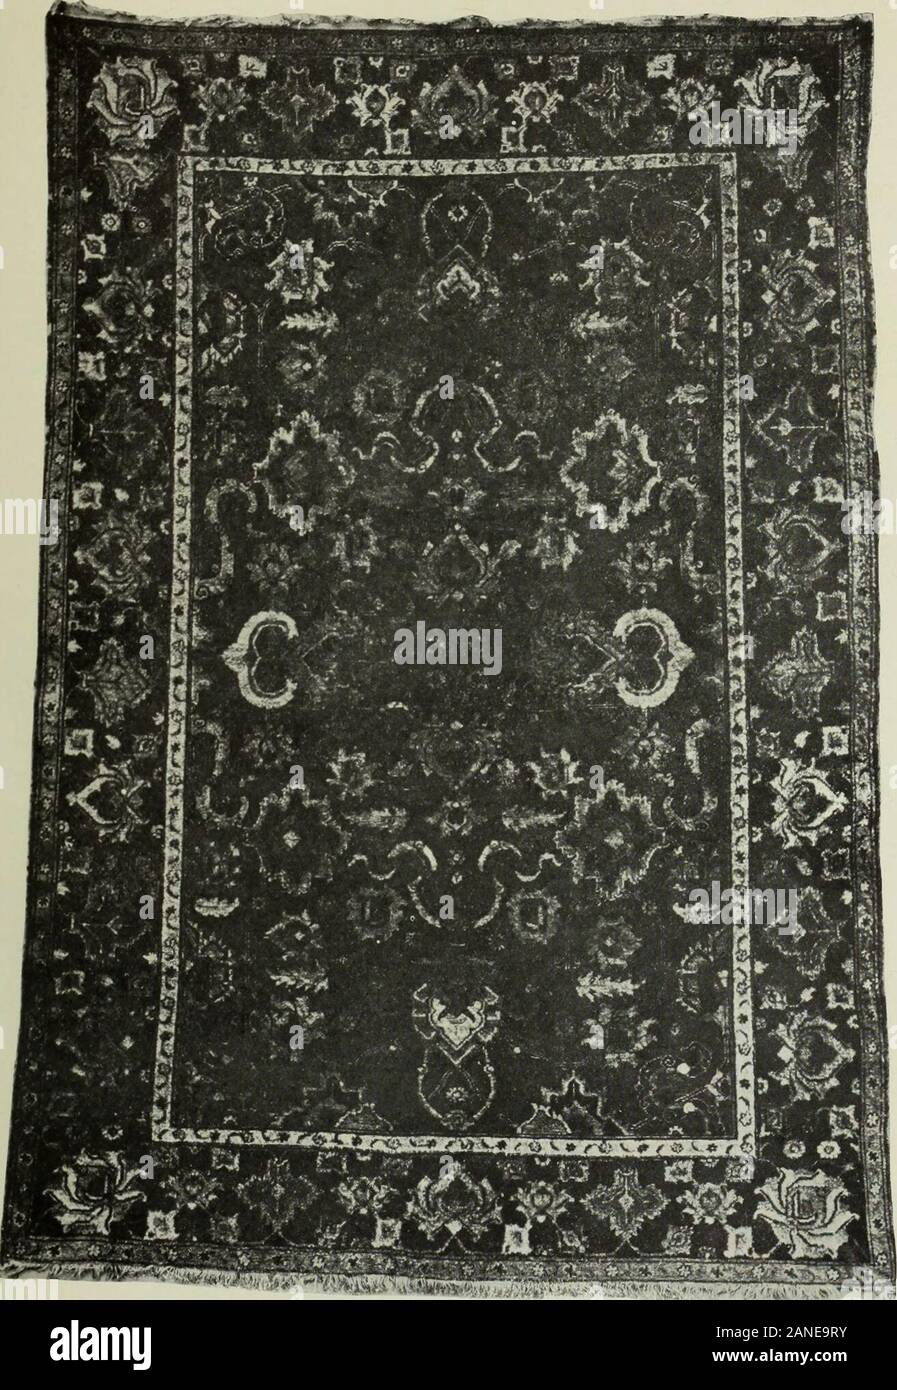 Oriental rugs, antique and modern . nesthe character of workmanship of a particular period, but affords astandard for determining by comparison the relative age of otherpieces. The year 946 corresponds with our year 1540 A. D., andthe position of the date indicates that it was inscribed a little beforethe completion of the fabric. Accordingly, it would not be unreason-able to assume that the carpet was begun during the closing yearsof the reign of Ismael, who died at Ardebil in 1524, and that it wasfinished during the reign of Tamasp I. To infer that at this period were many such carpets would Stock Photo